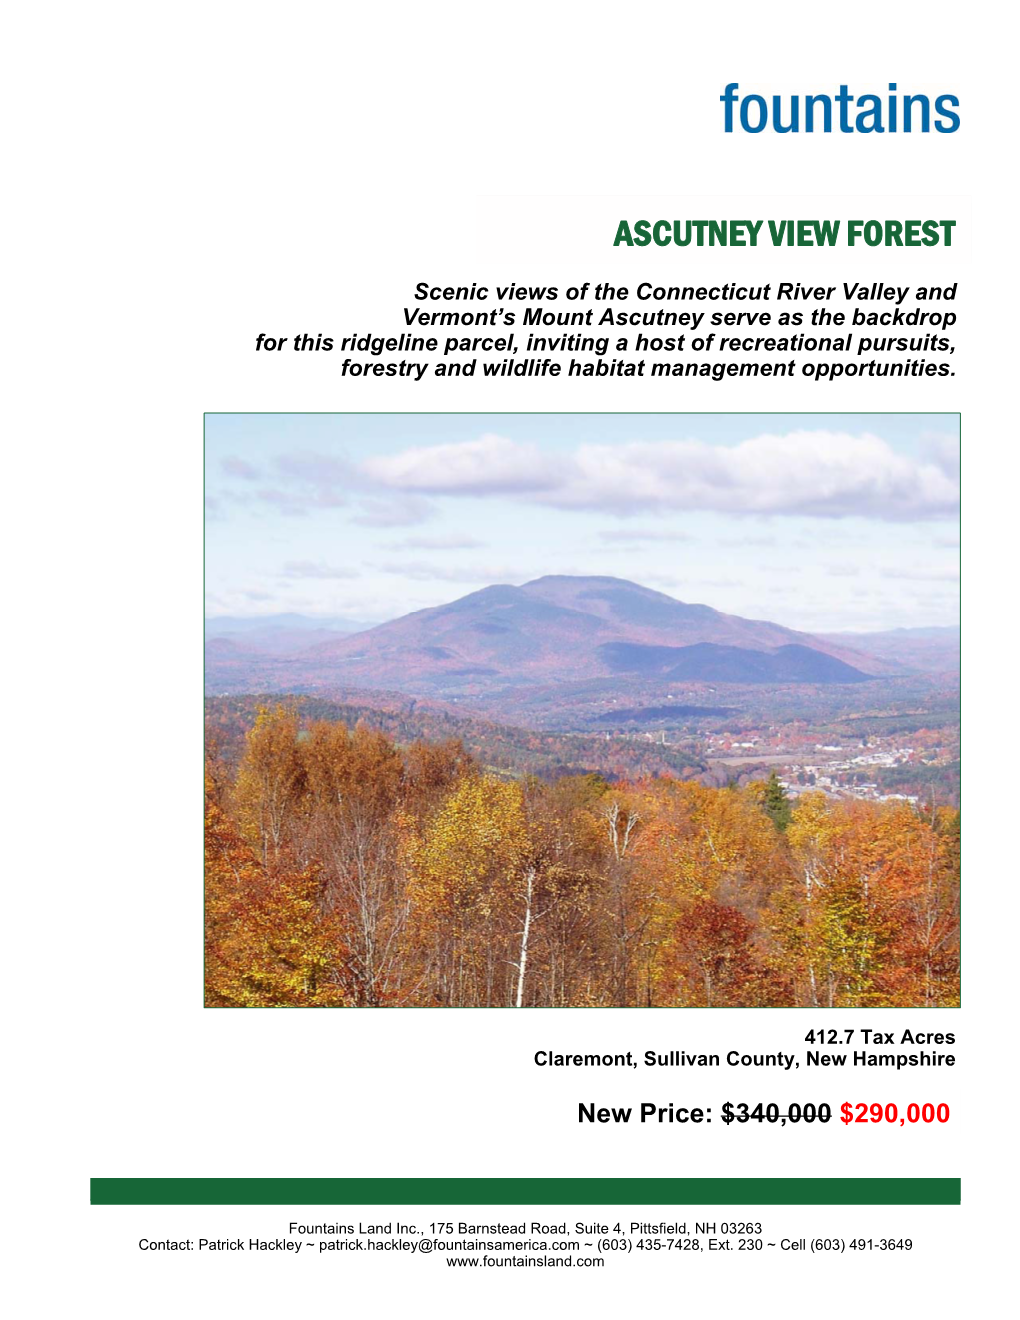 Ascutney View Forest